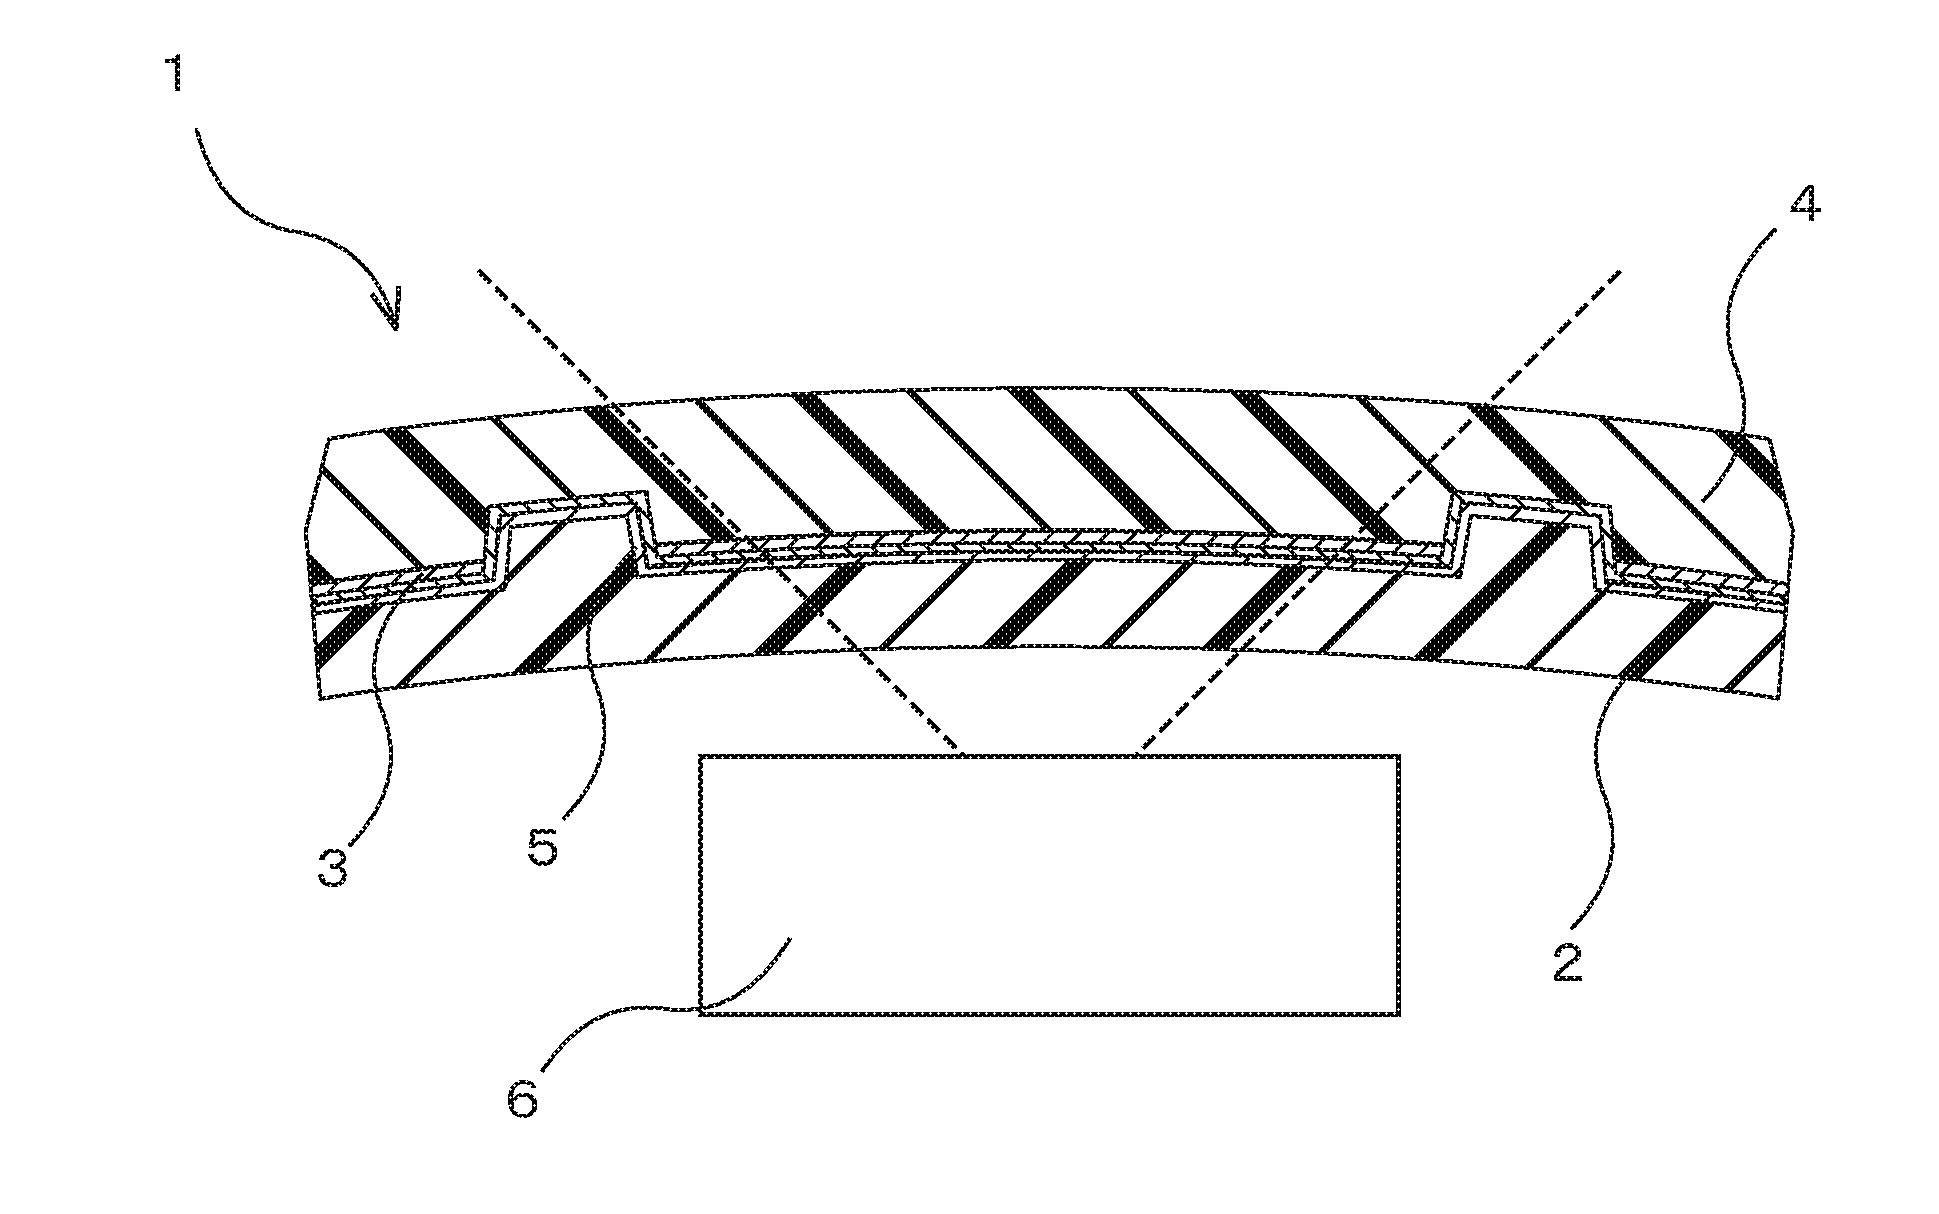 Electromagnetic-wave transmitting cover